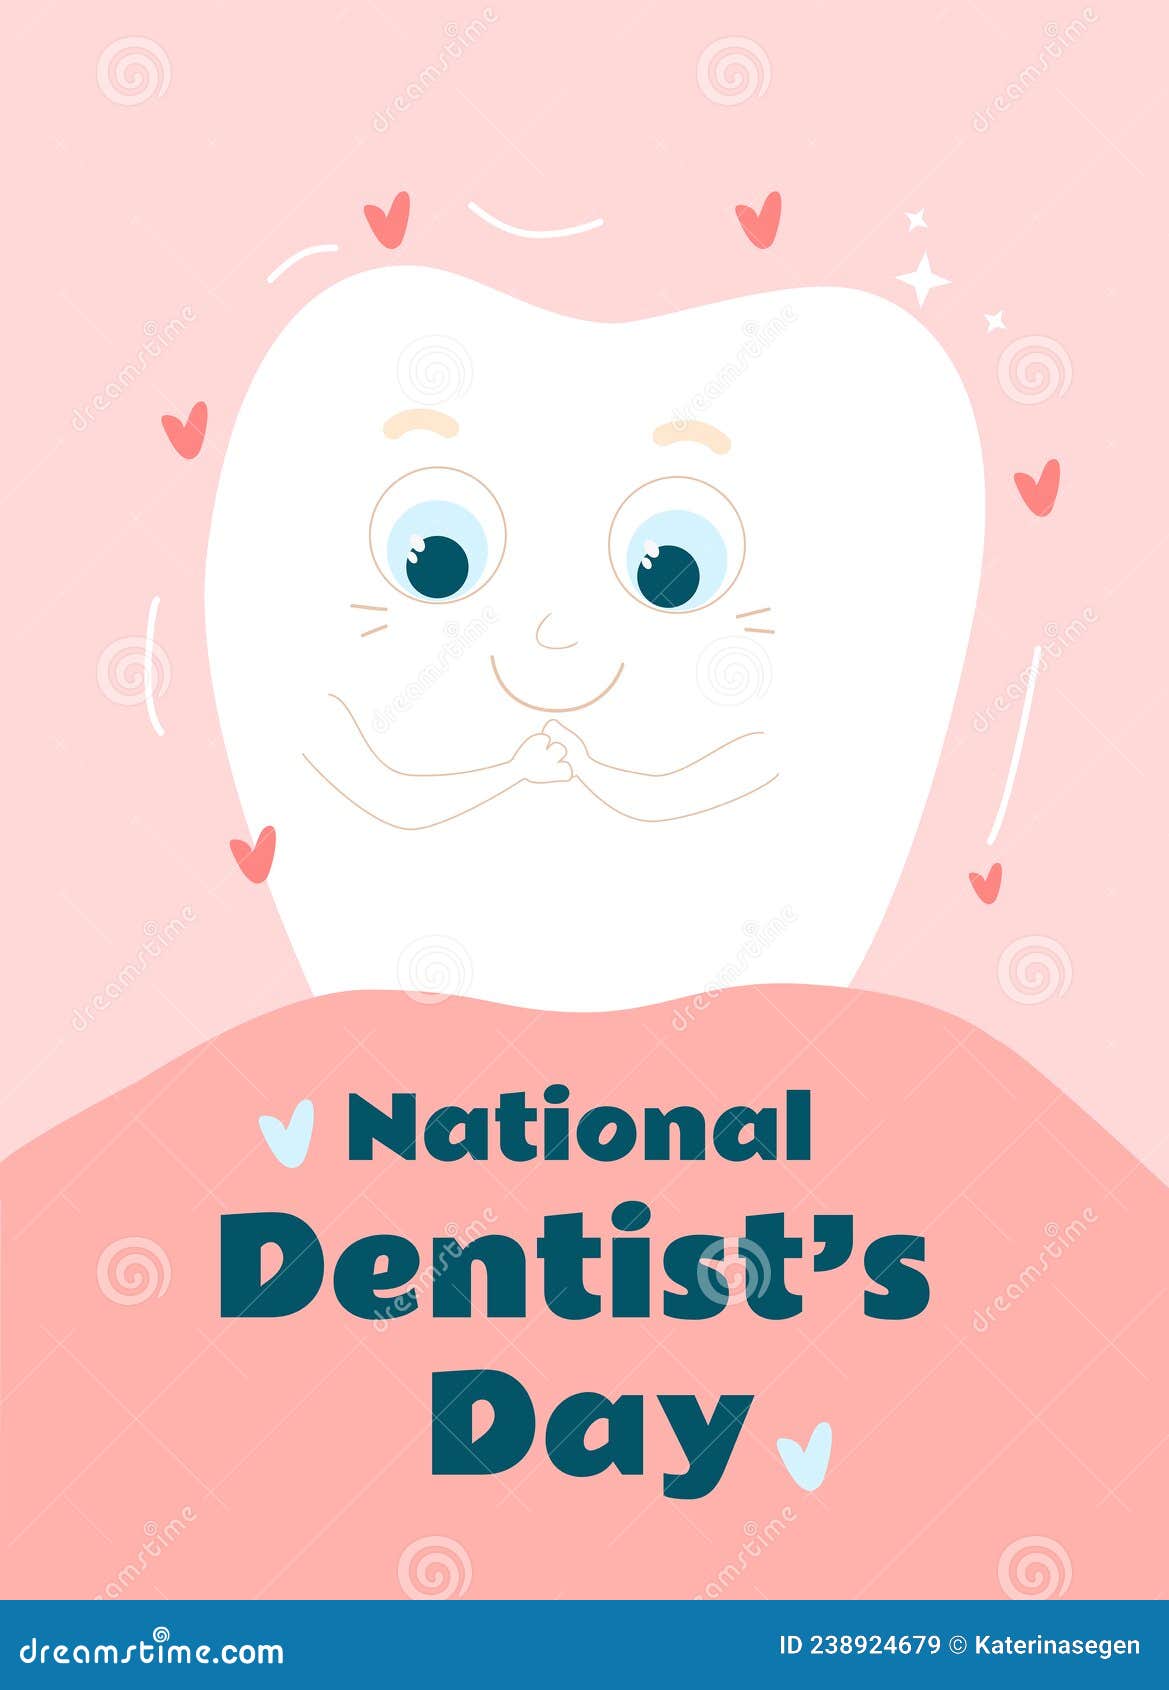 a cute and happy tooth smiles in the mouth on a pink and healthy gum. national dentistÃ¢â¬â¢s day greeting card.